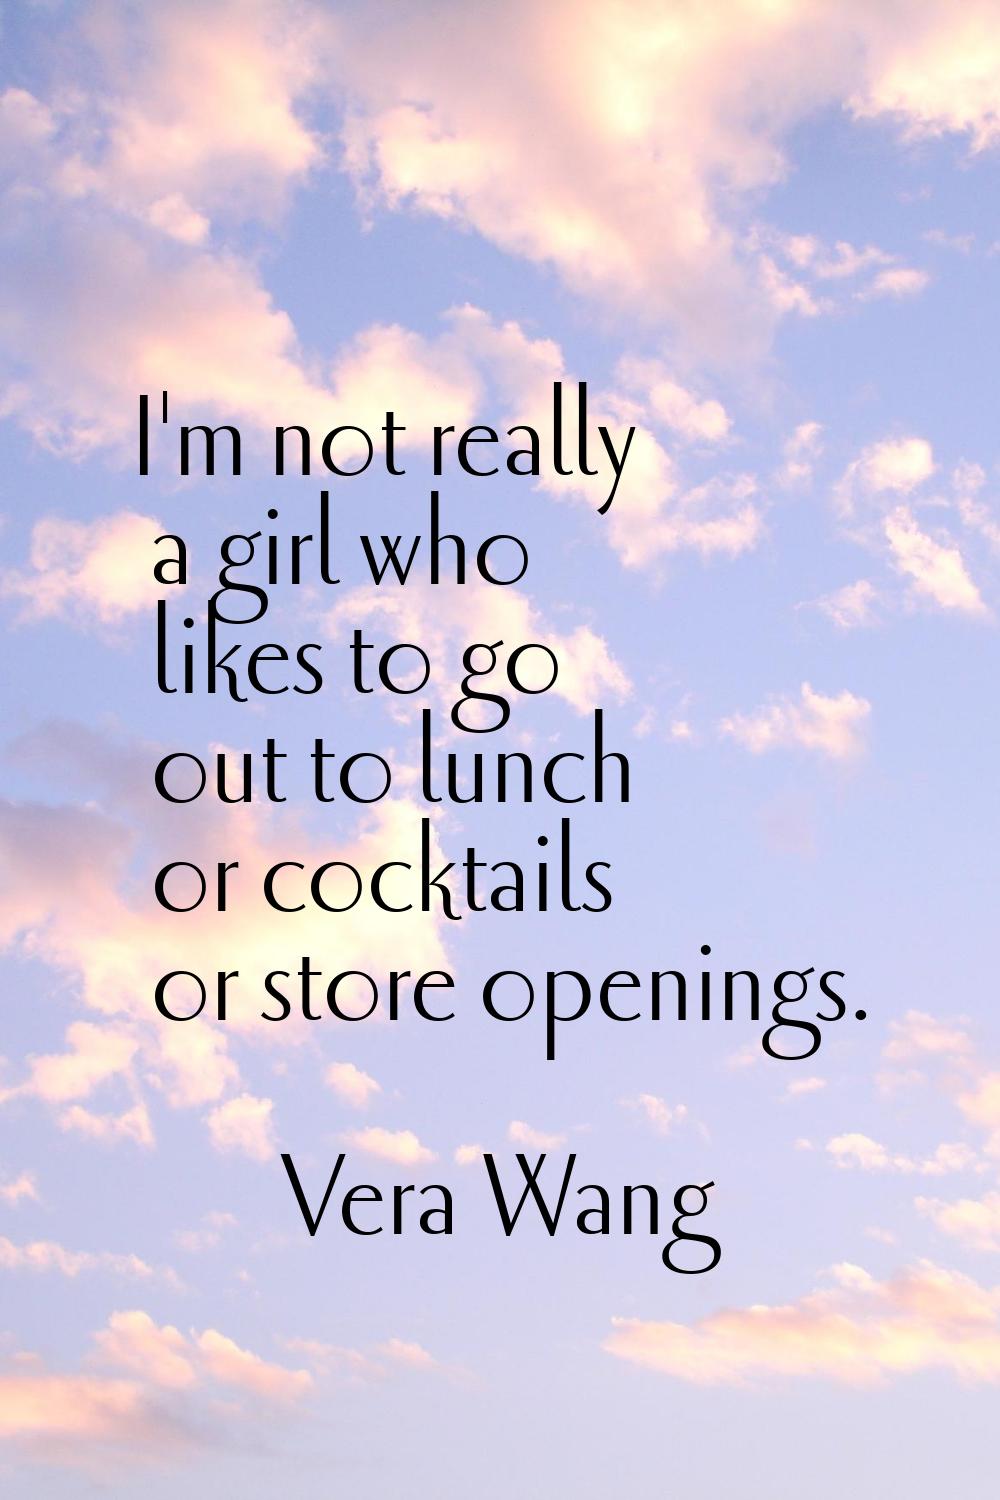 I'm not really a girl who likes to go out to lunch or cocktails or store openings.